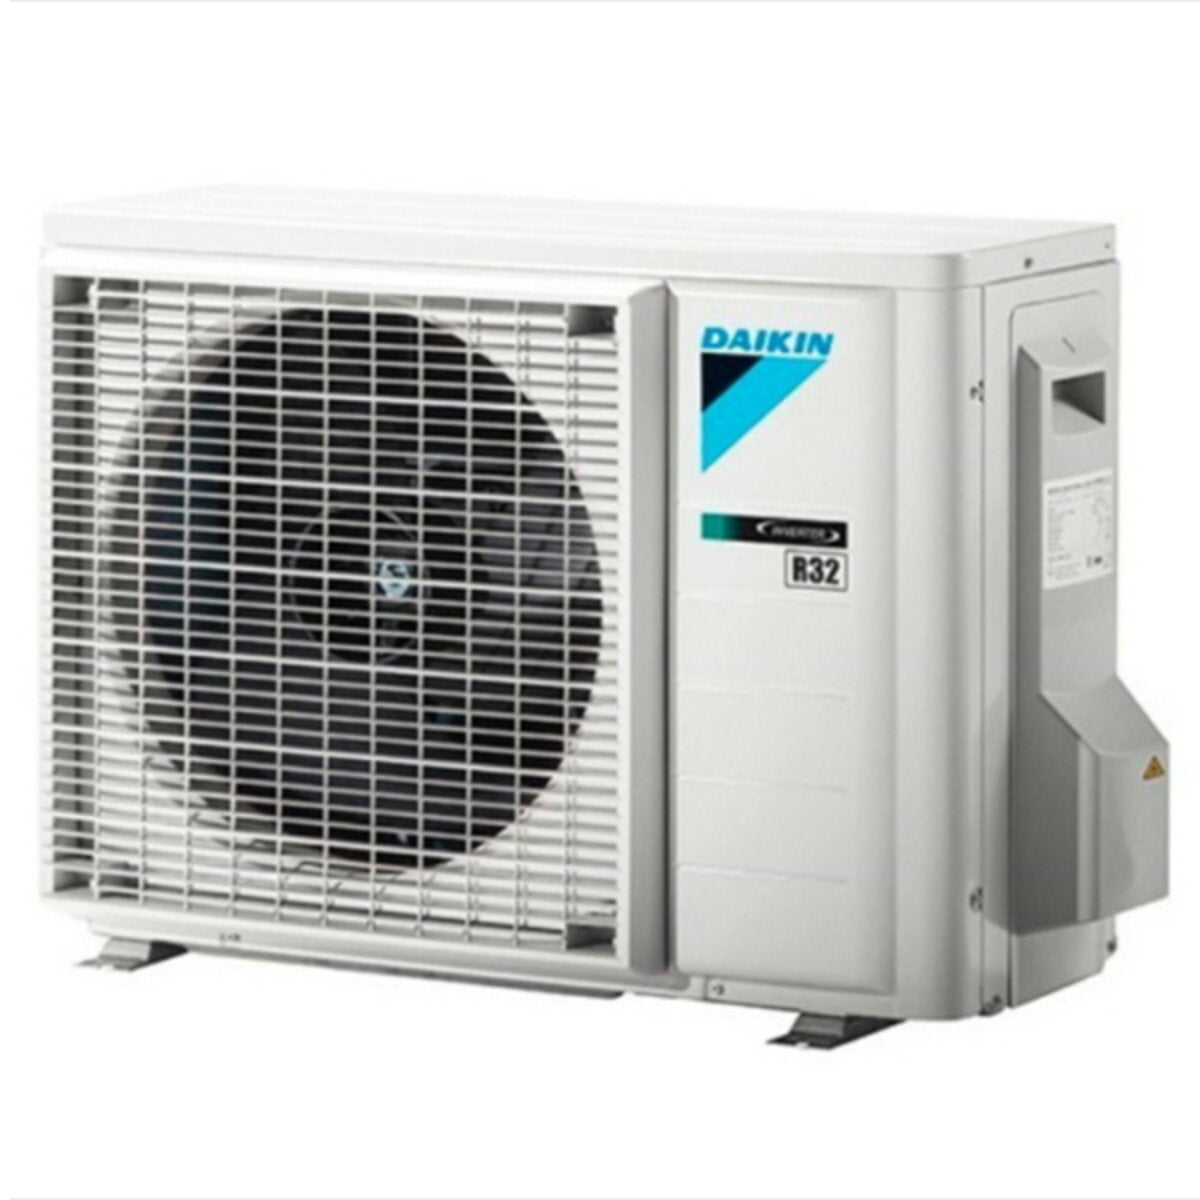 Daikin Mini Sky FDXM-F9 ductable air conditioner 9000 BTU inverter A+ R32 with wall control